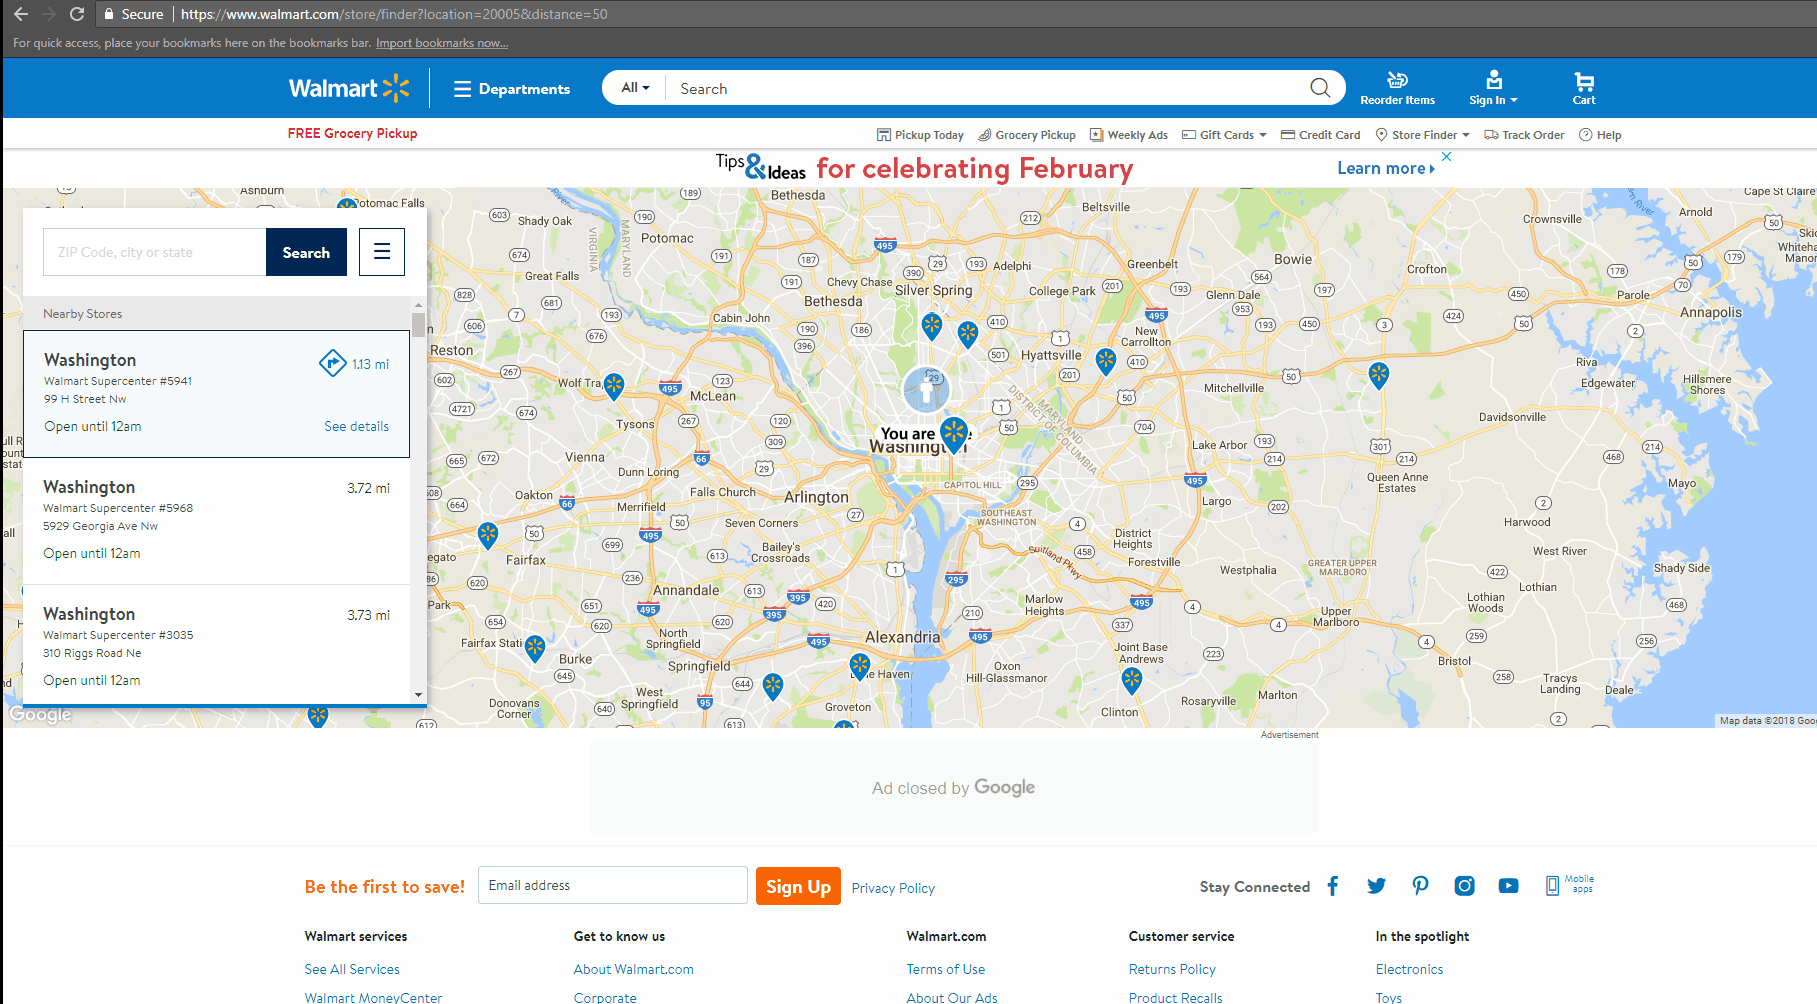 walmart-store-locations-data-to-extract